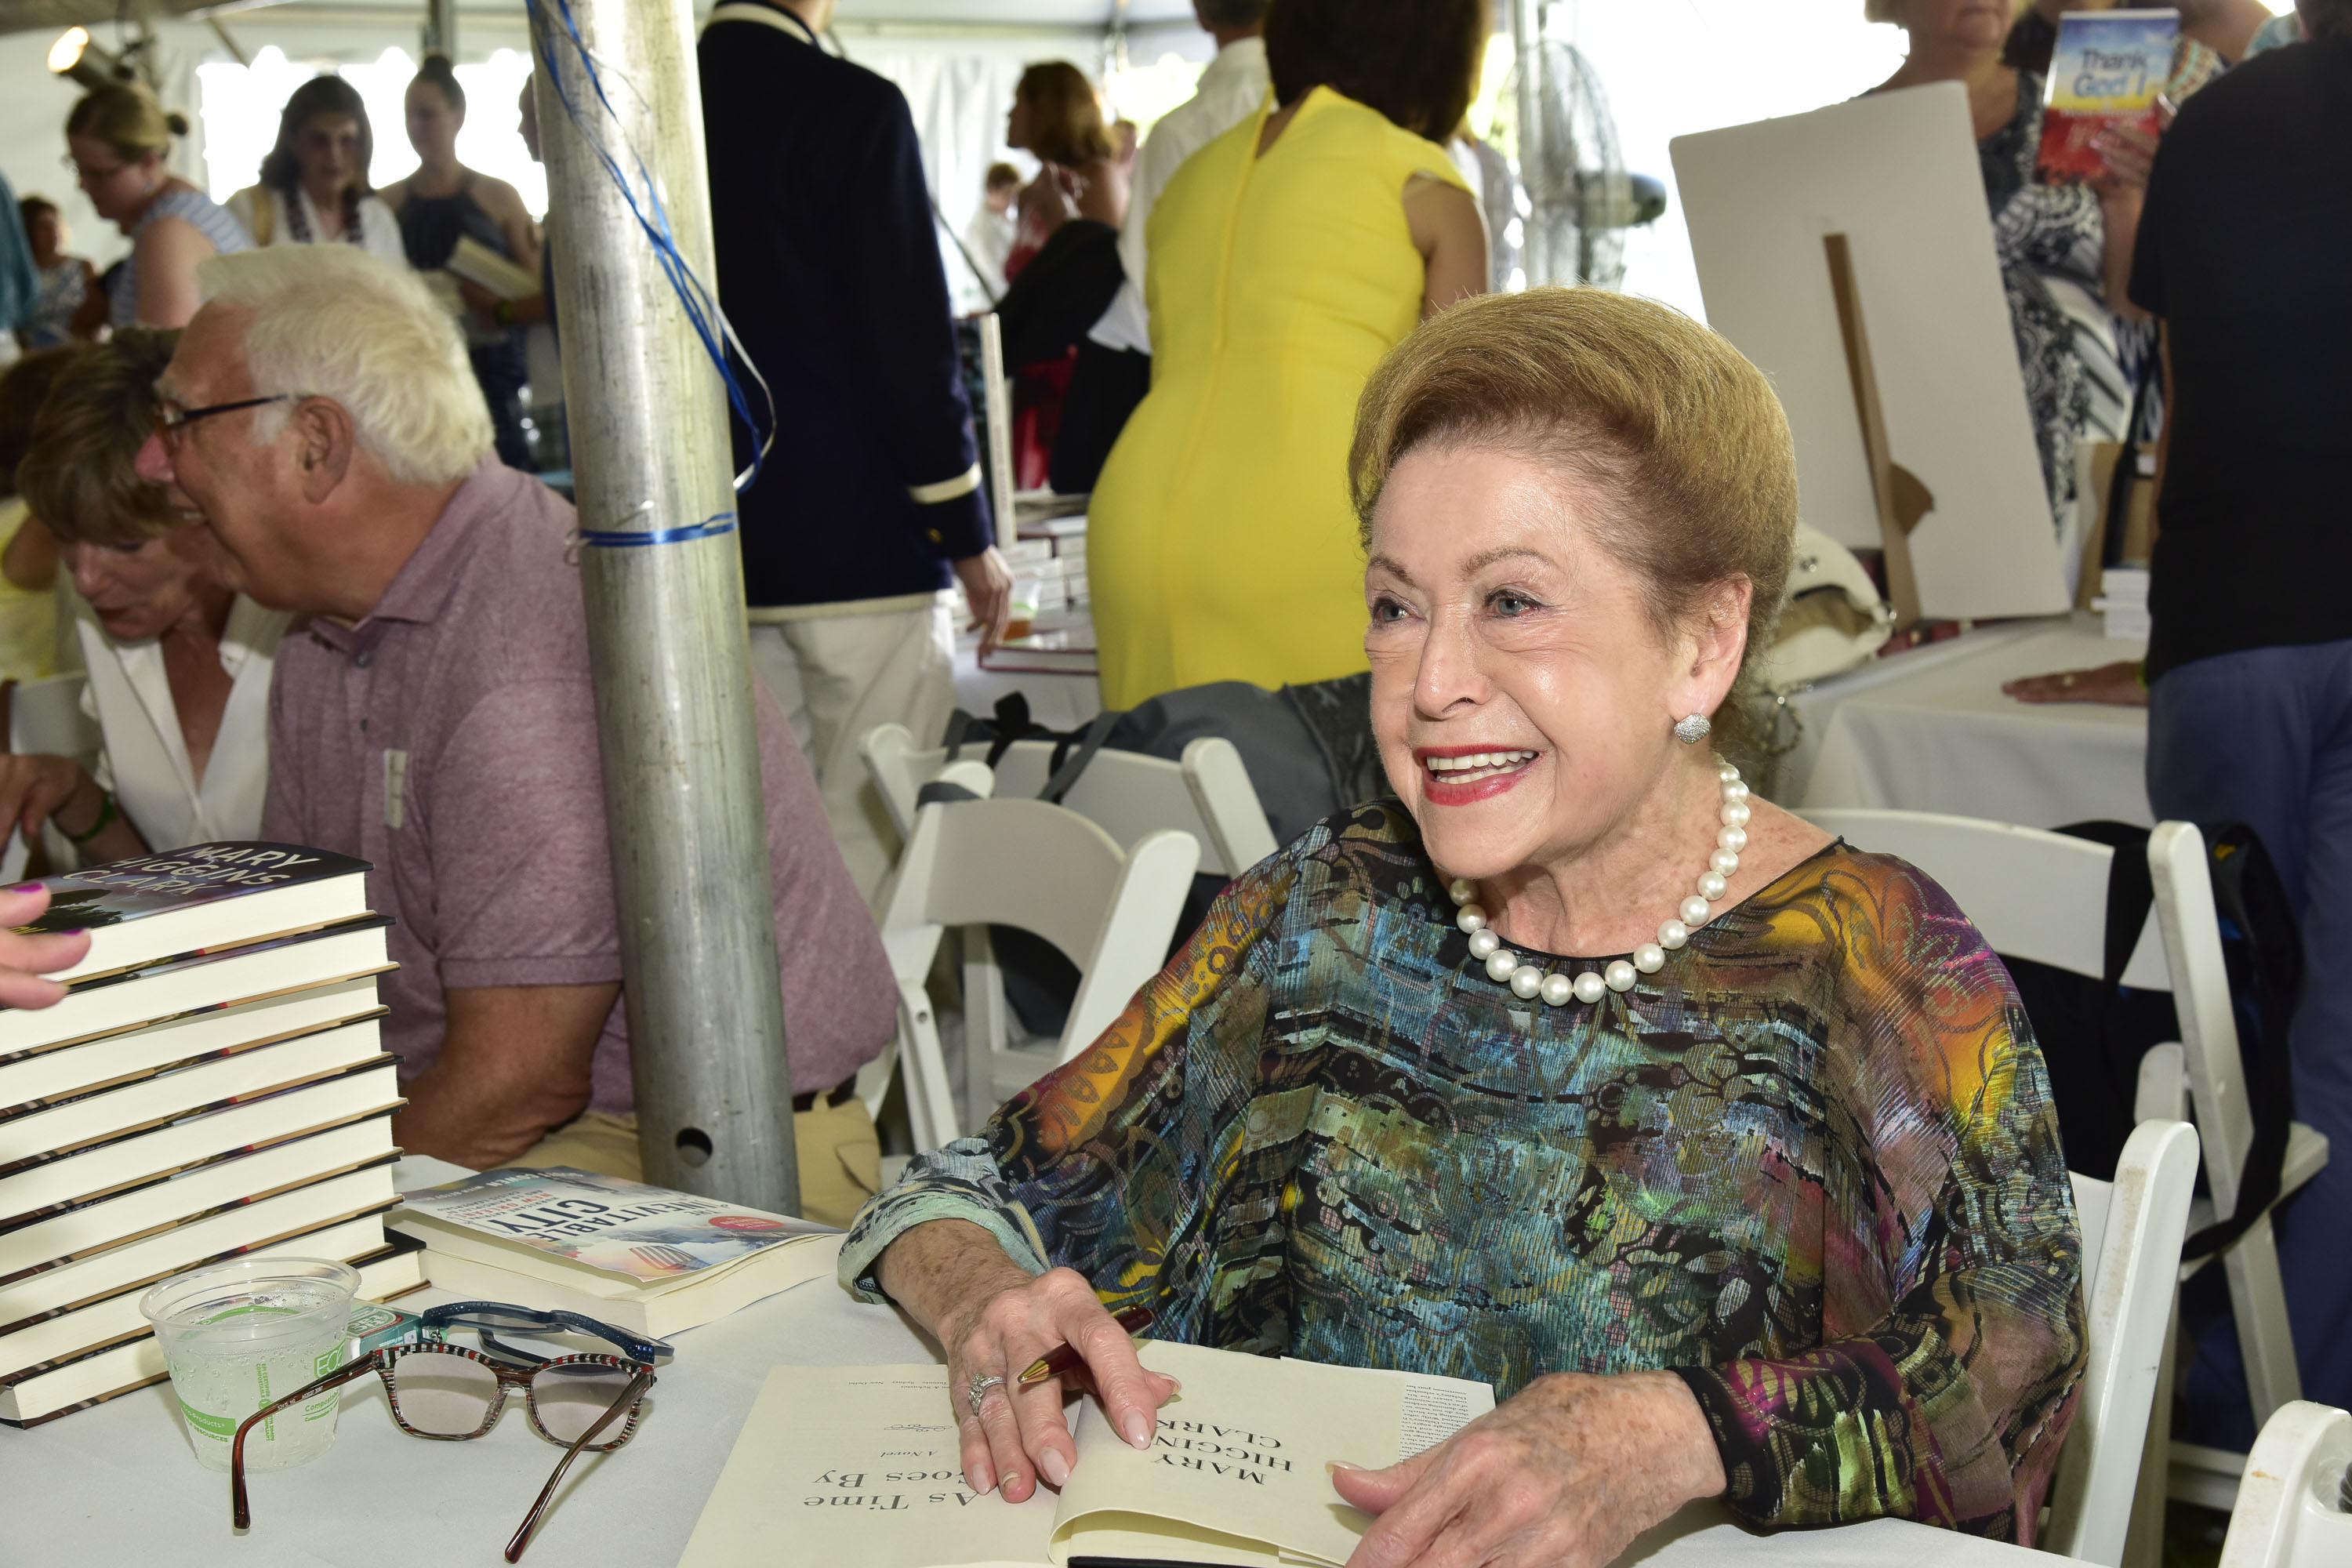 Mary Higgins Clark sits at a folding table with a stack of her books on it. She has one book open to sign, and is smiling.